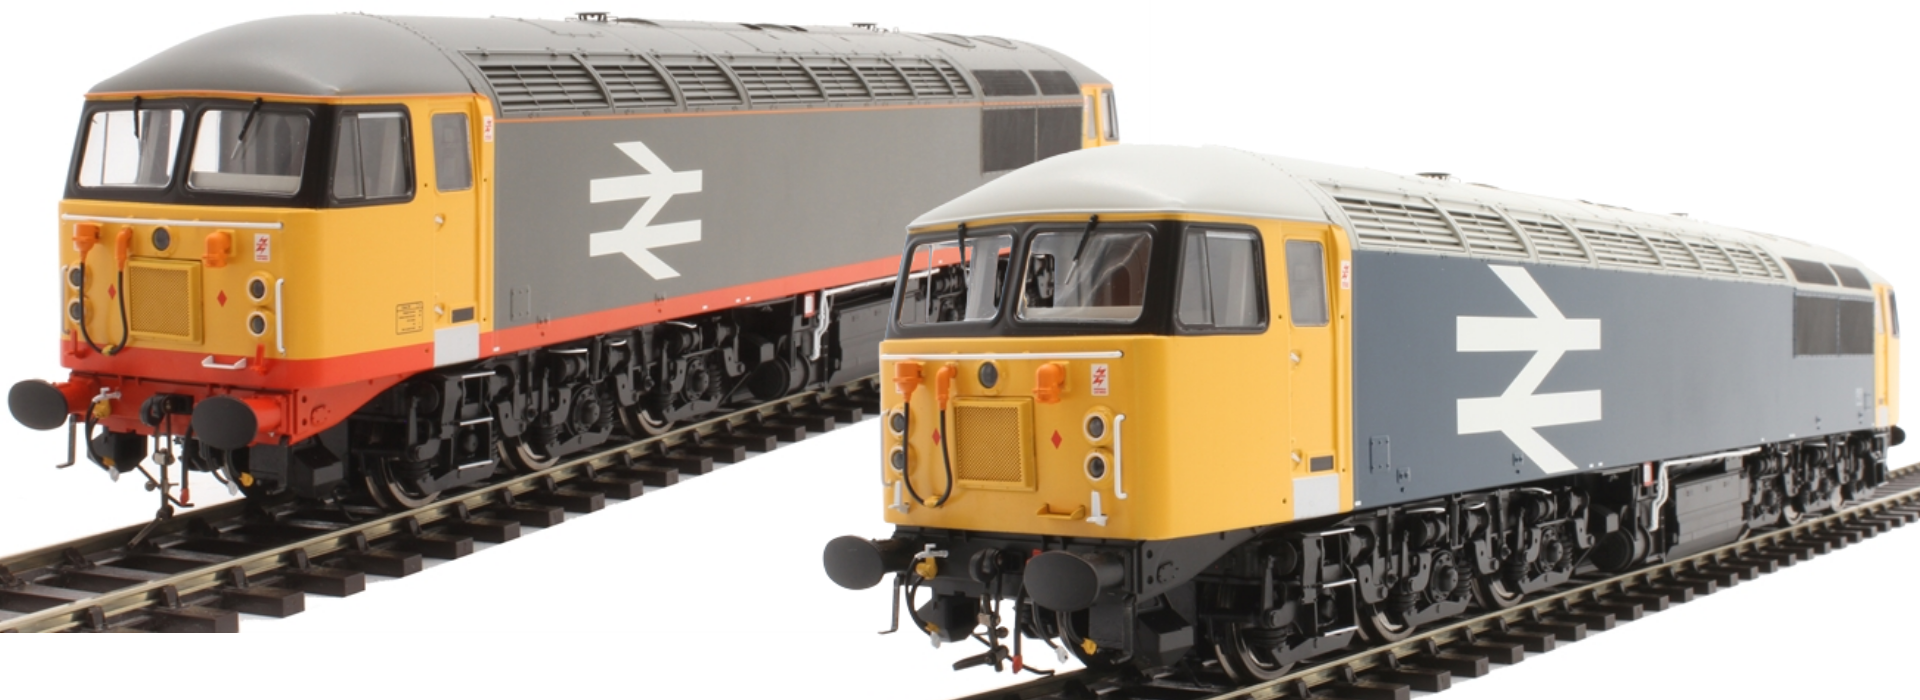 5603 - Railfreight red stripe livery and 5601 - BR large logo blue livery